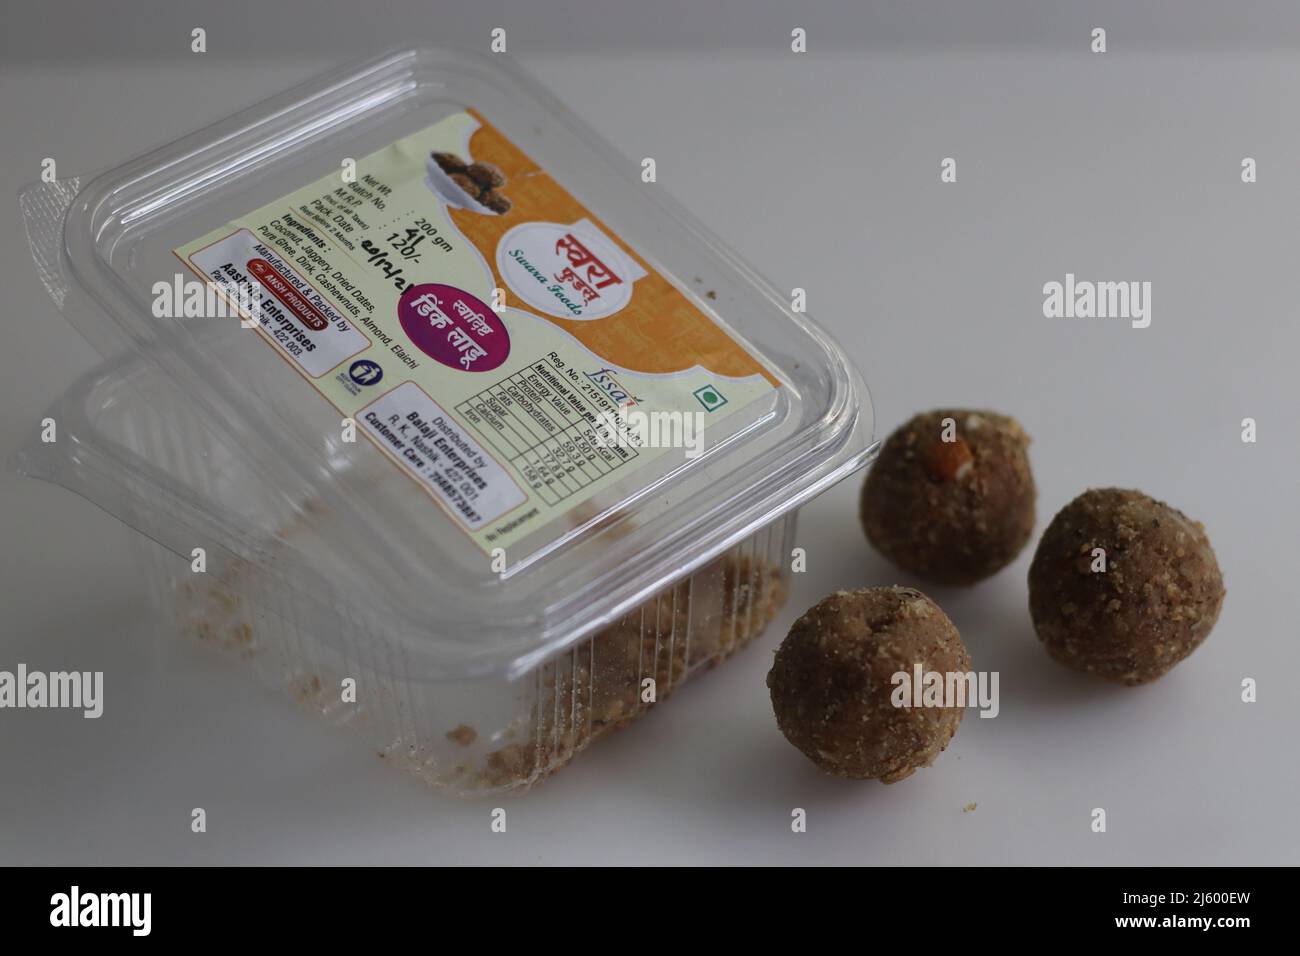 Mumbai, Maharashtra, India, April 16 2022: Peanut Dink Ladoo made by swara foods. Peanut Dinkache Ladoo are one of the nutrition rich ladoos which are Stock Photo